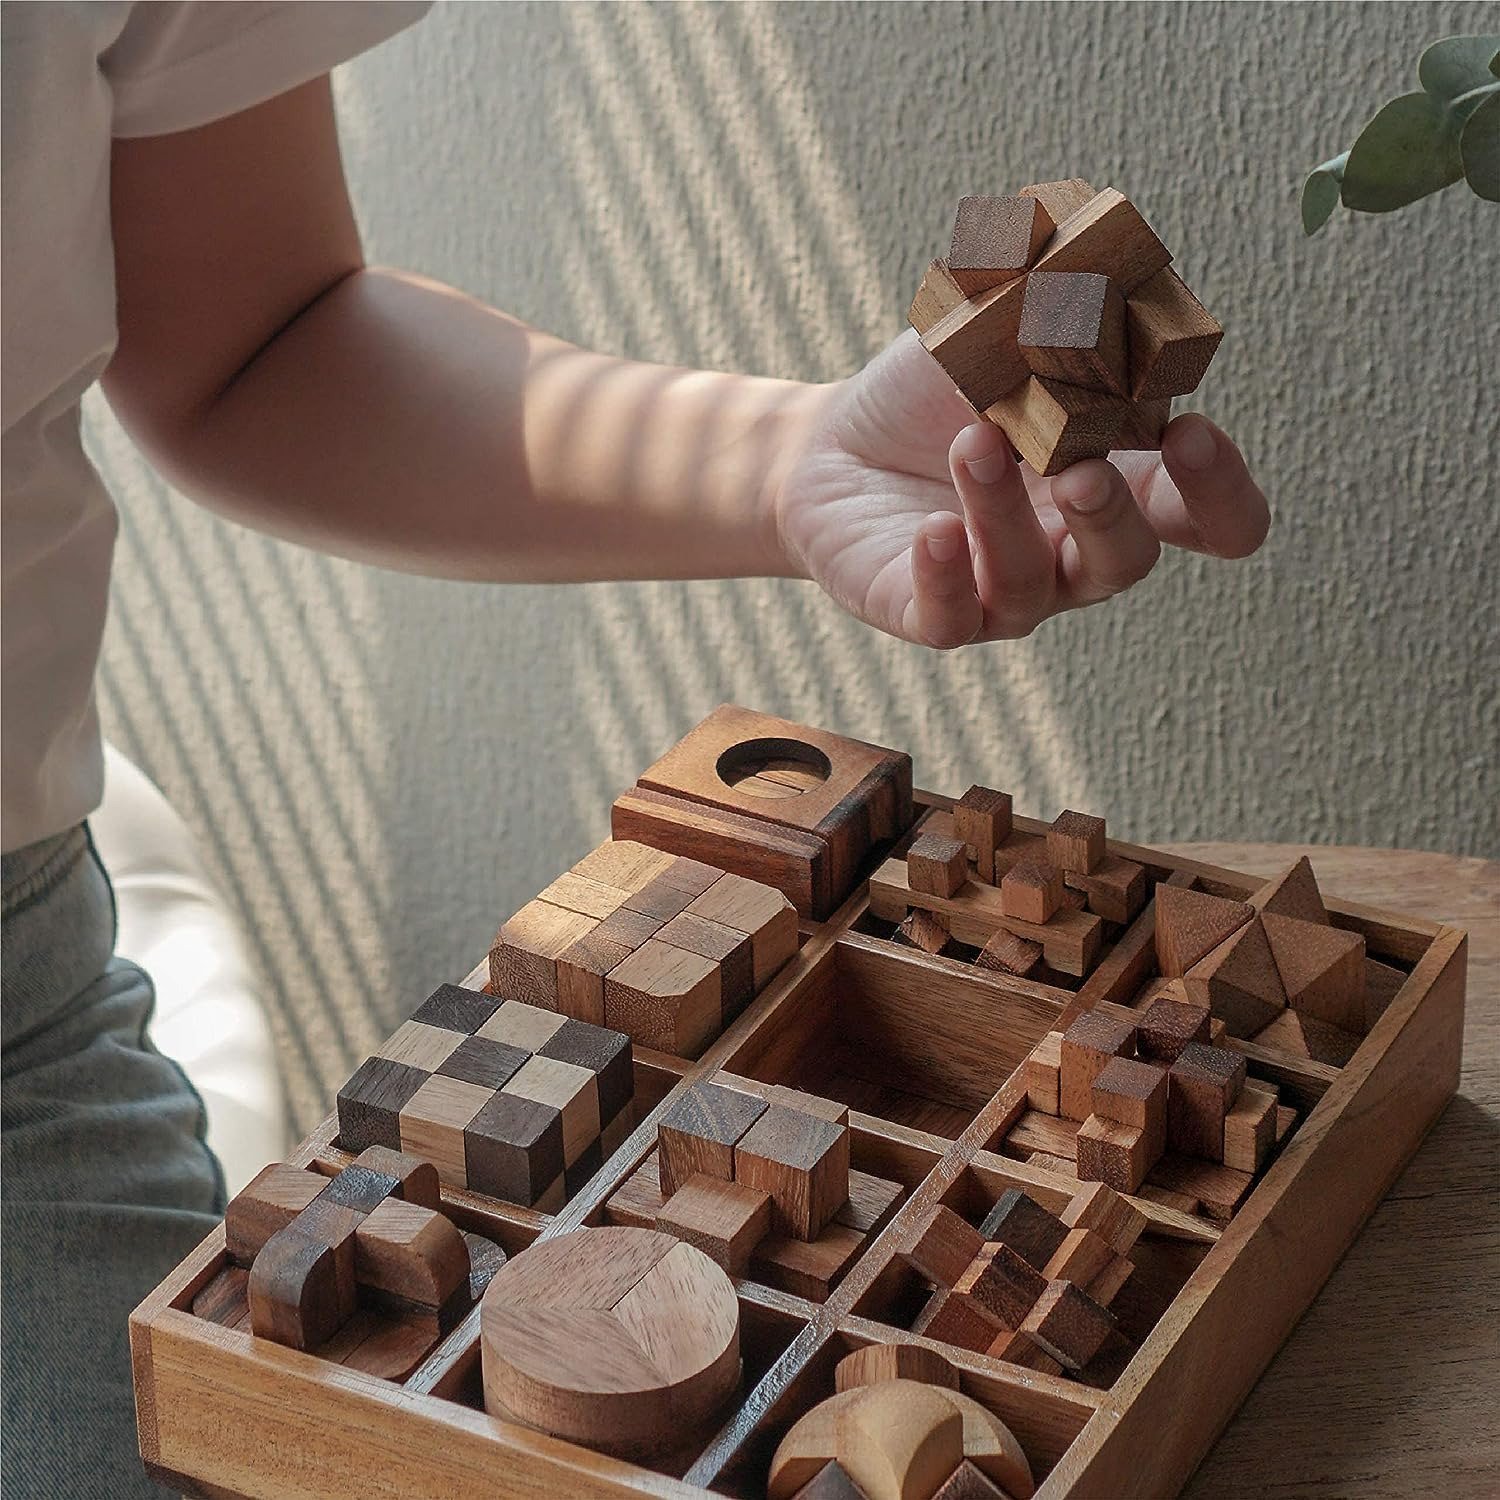 Wooden puzzles in box